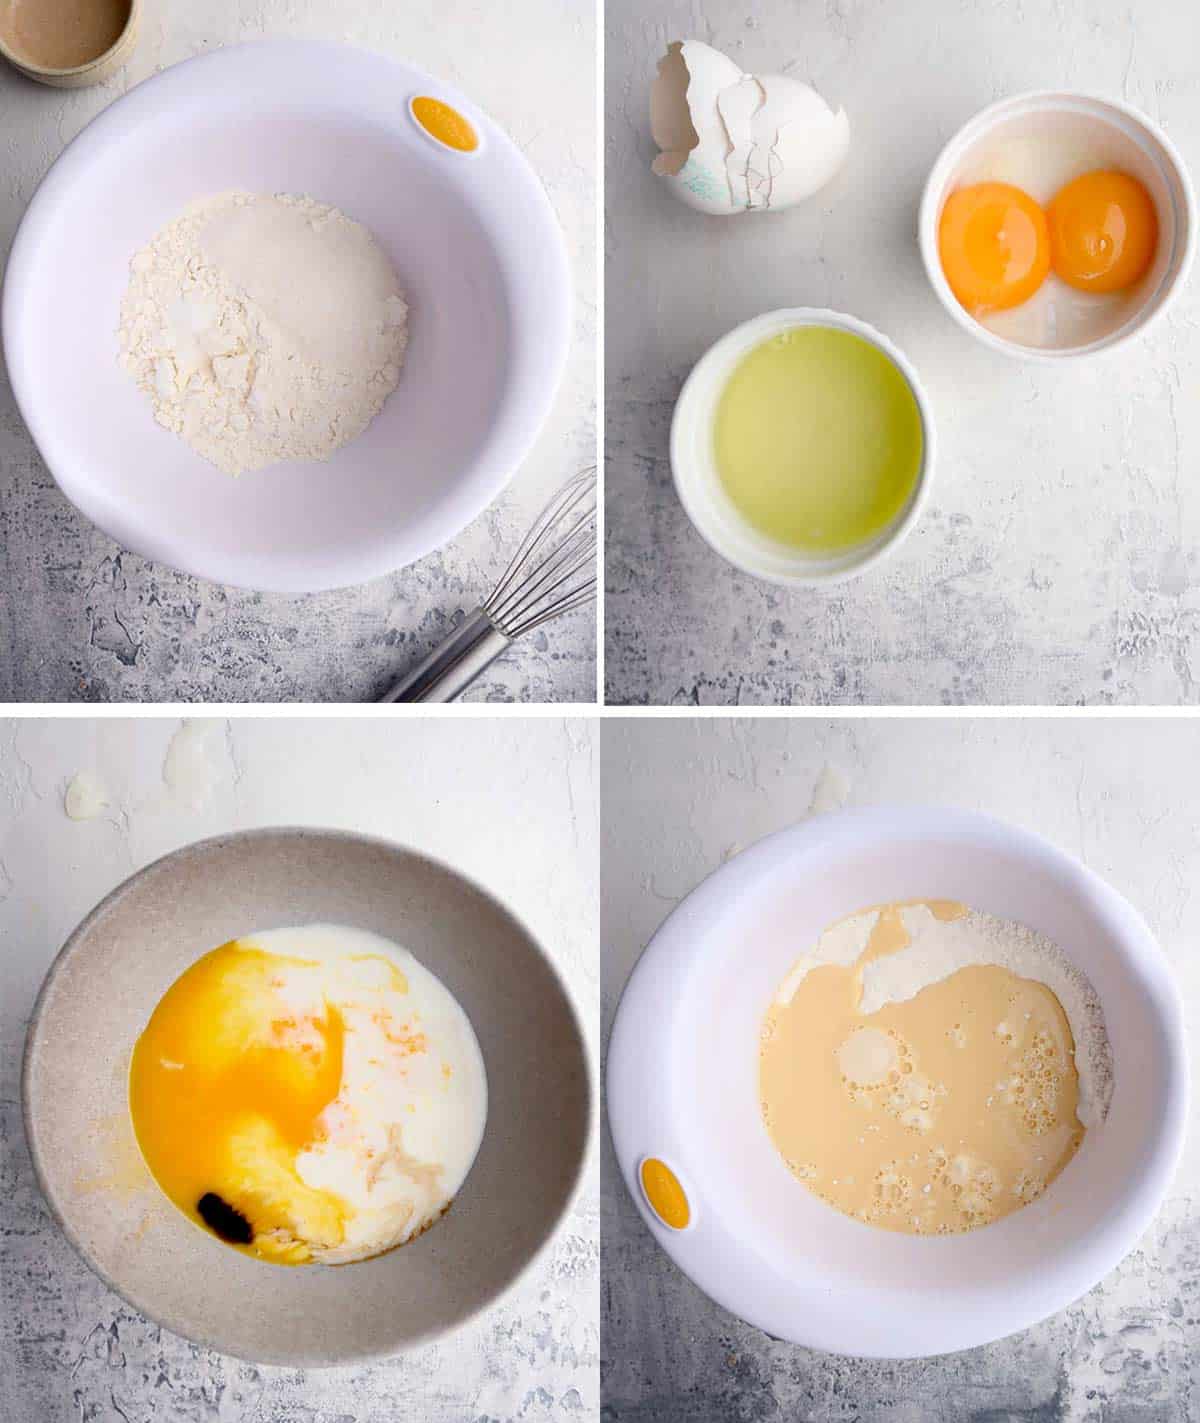 A collage shows how to make batter for pancakes without baking powder.